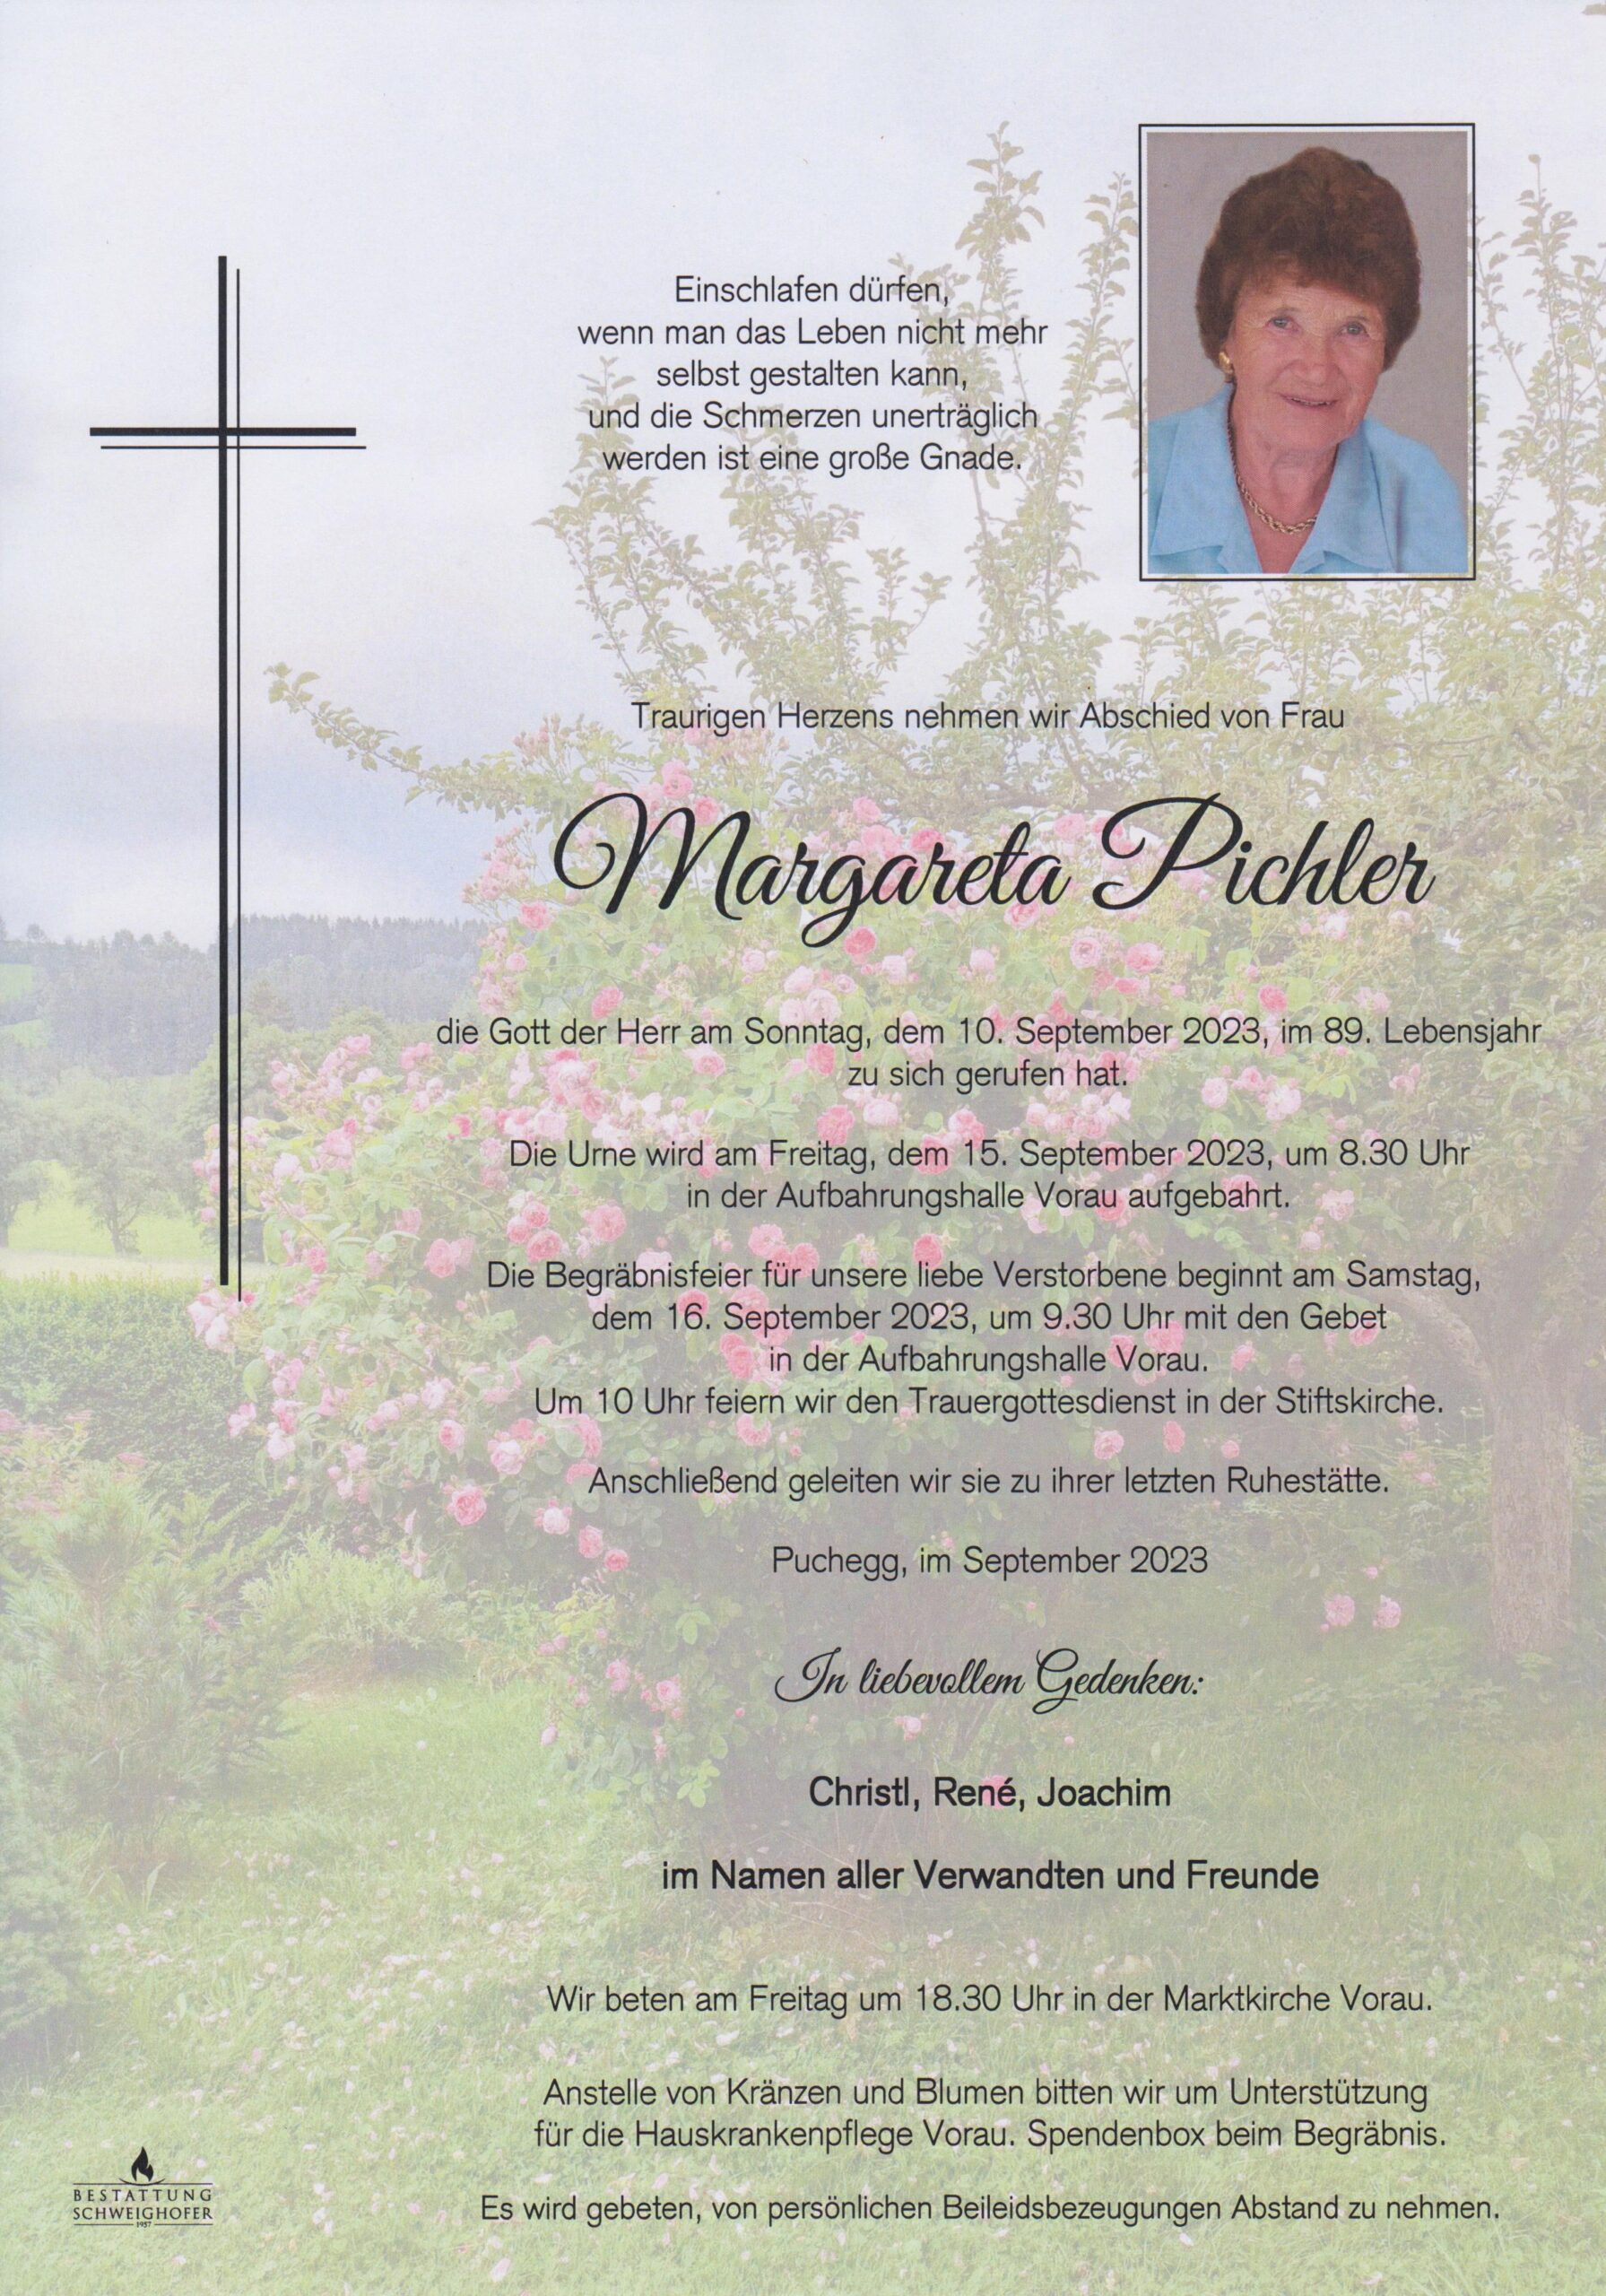 You are currently viewing Margareta Pichler